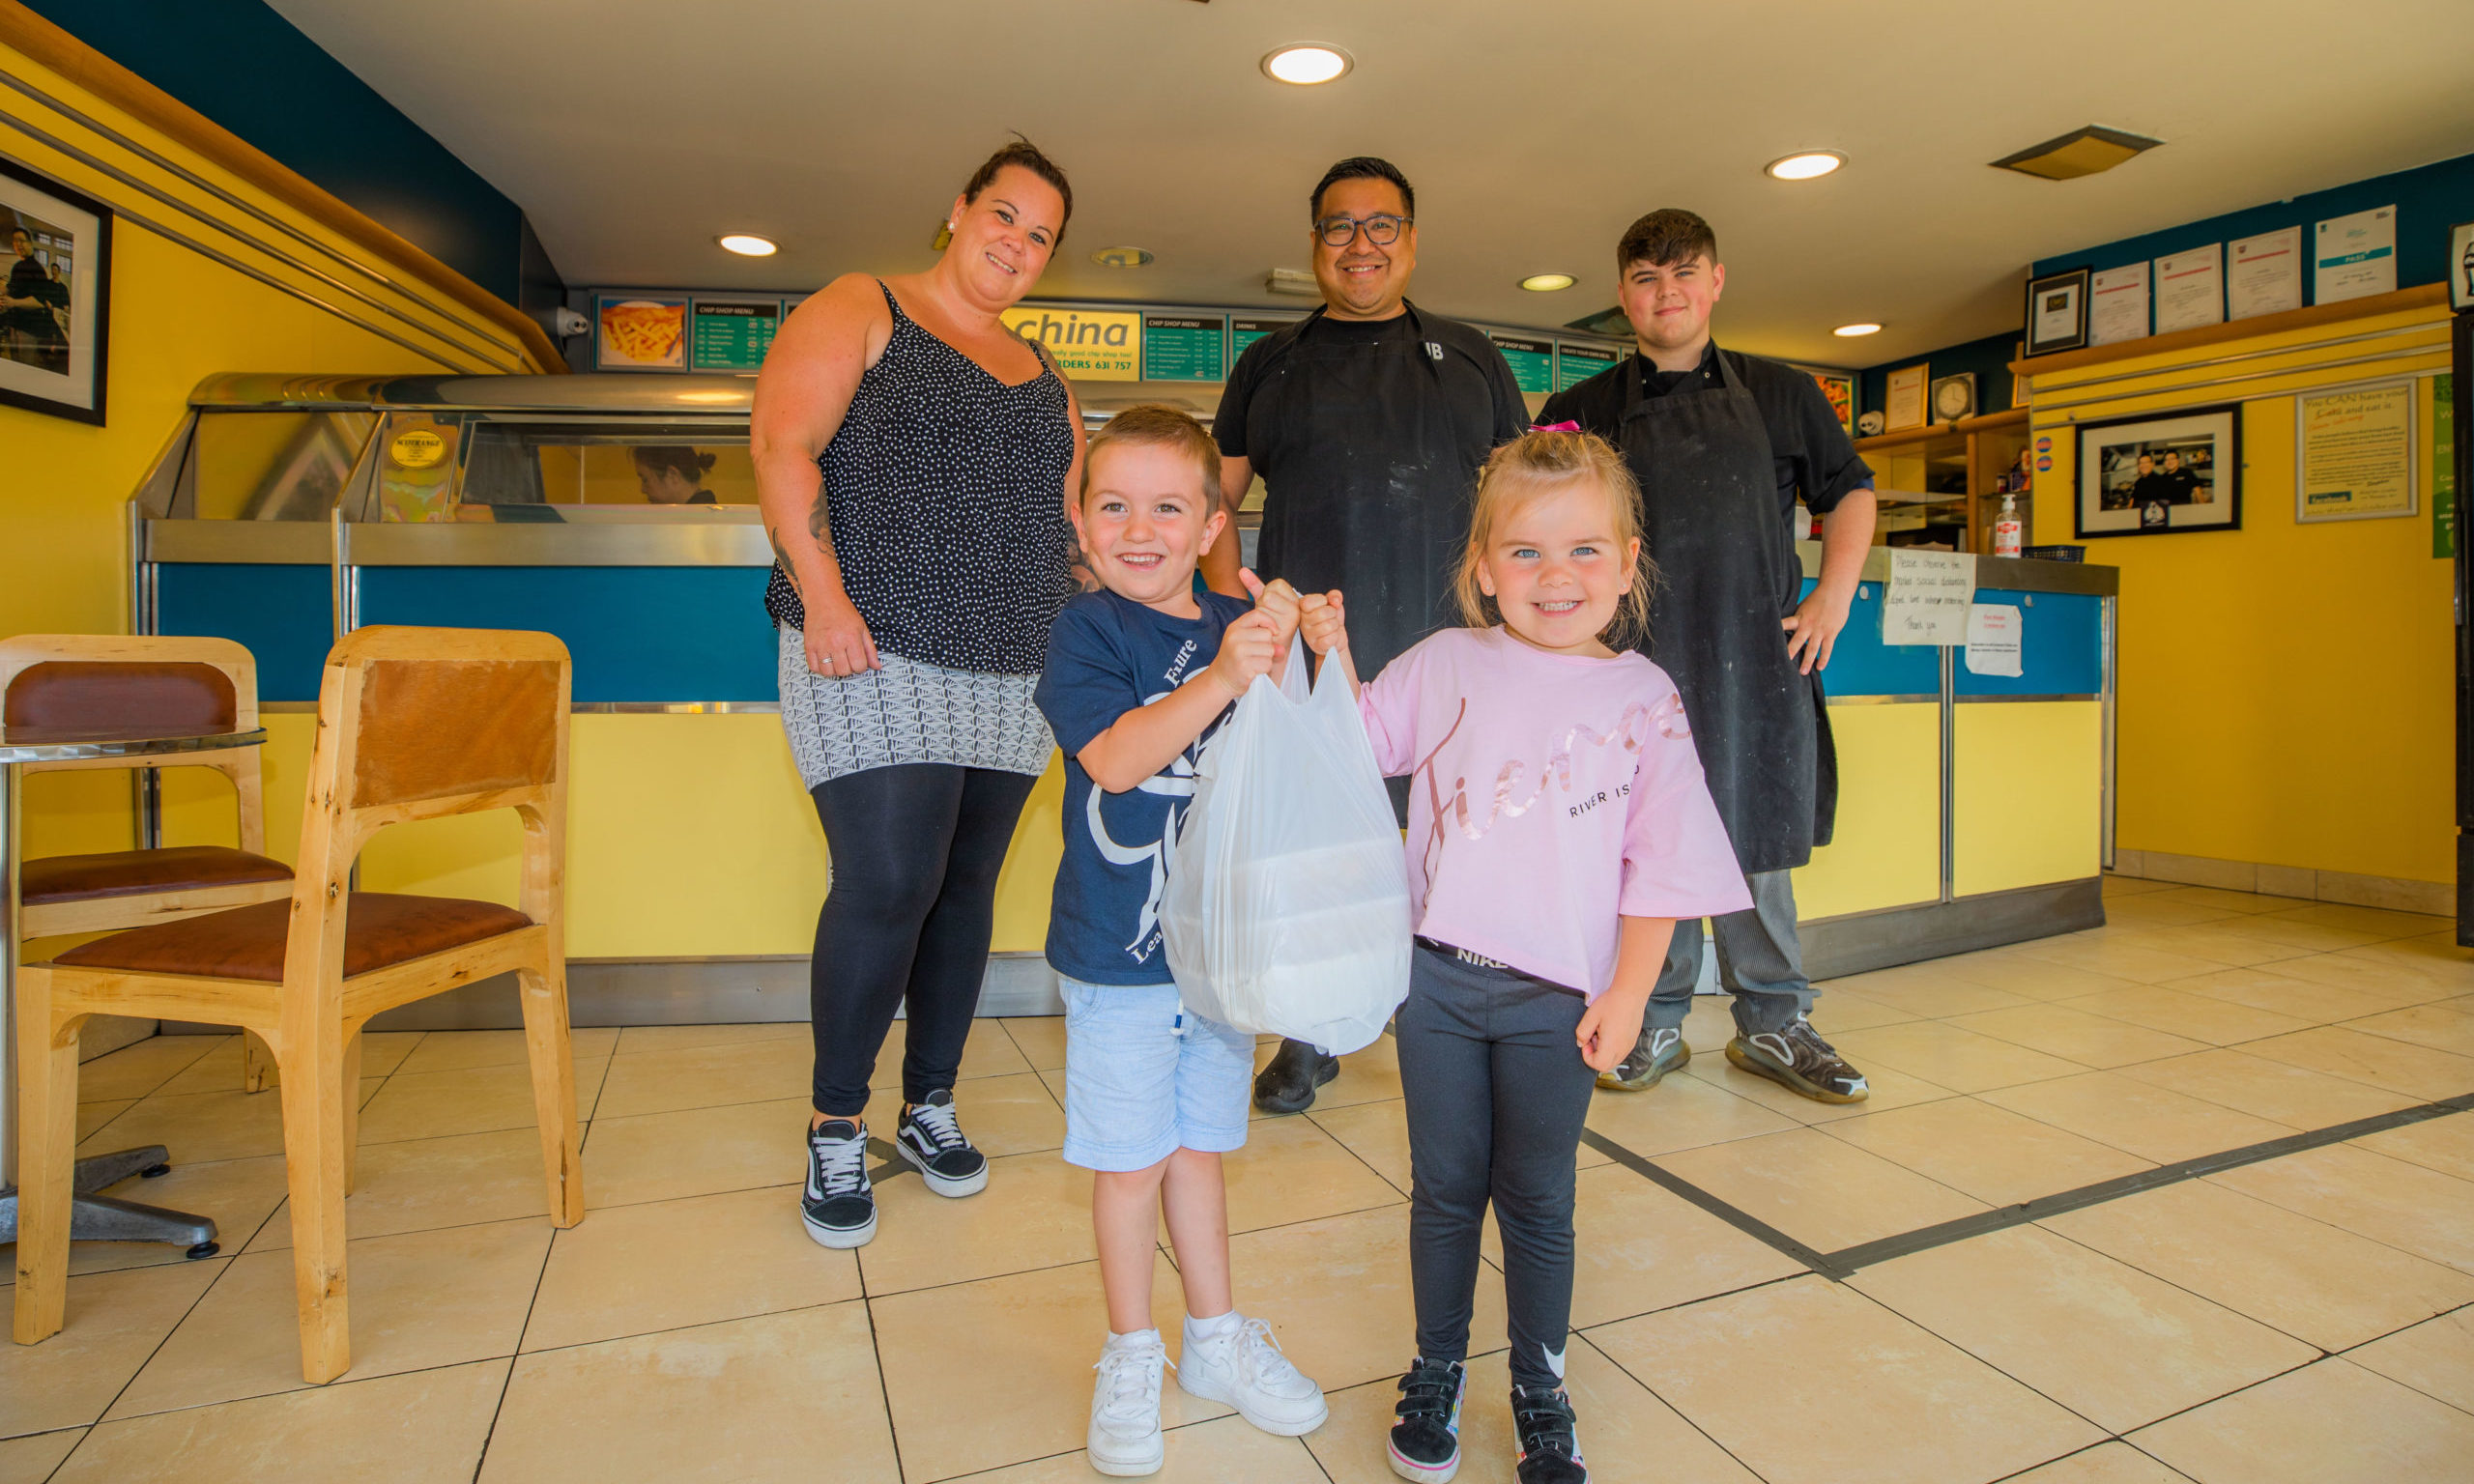 Mason and Olivia Harvey (aged 4) alongside mum Jo Harvey, Pete Chan and staff member
Ciaran Cushnie. Jo and children are delivering the food to a friend that she nominated